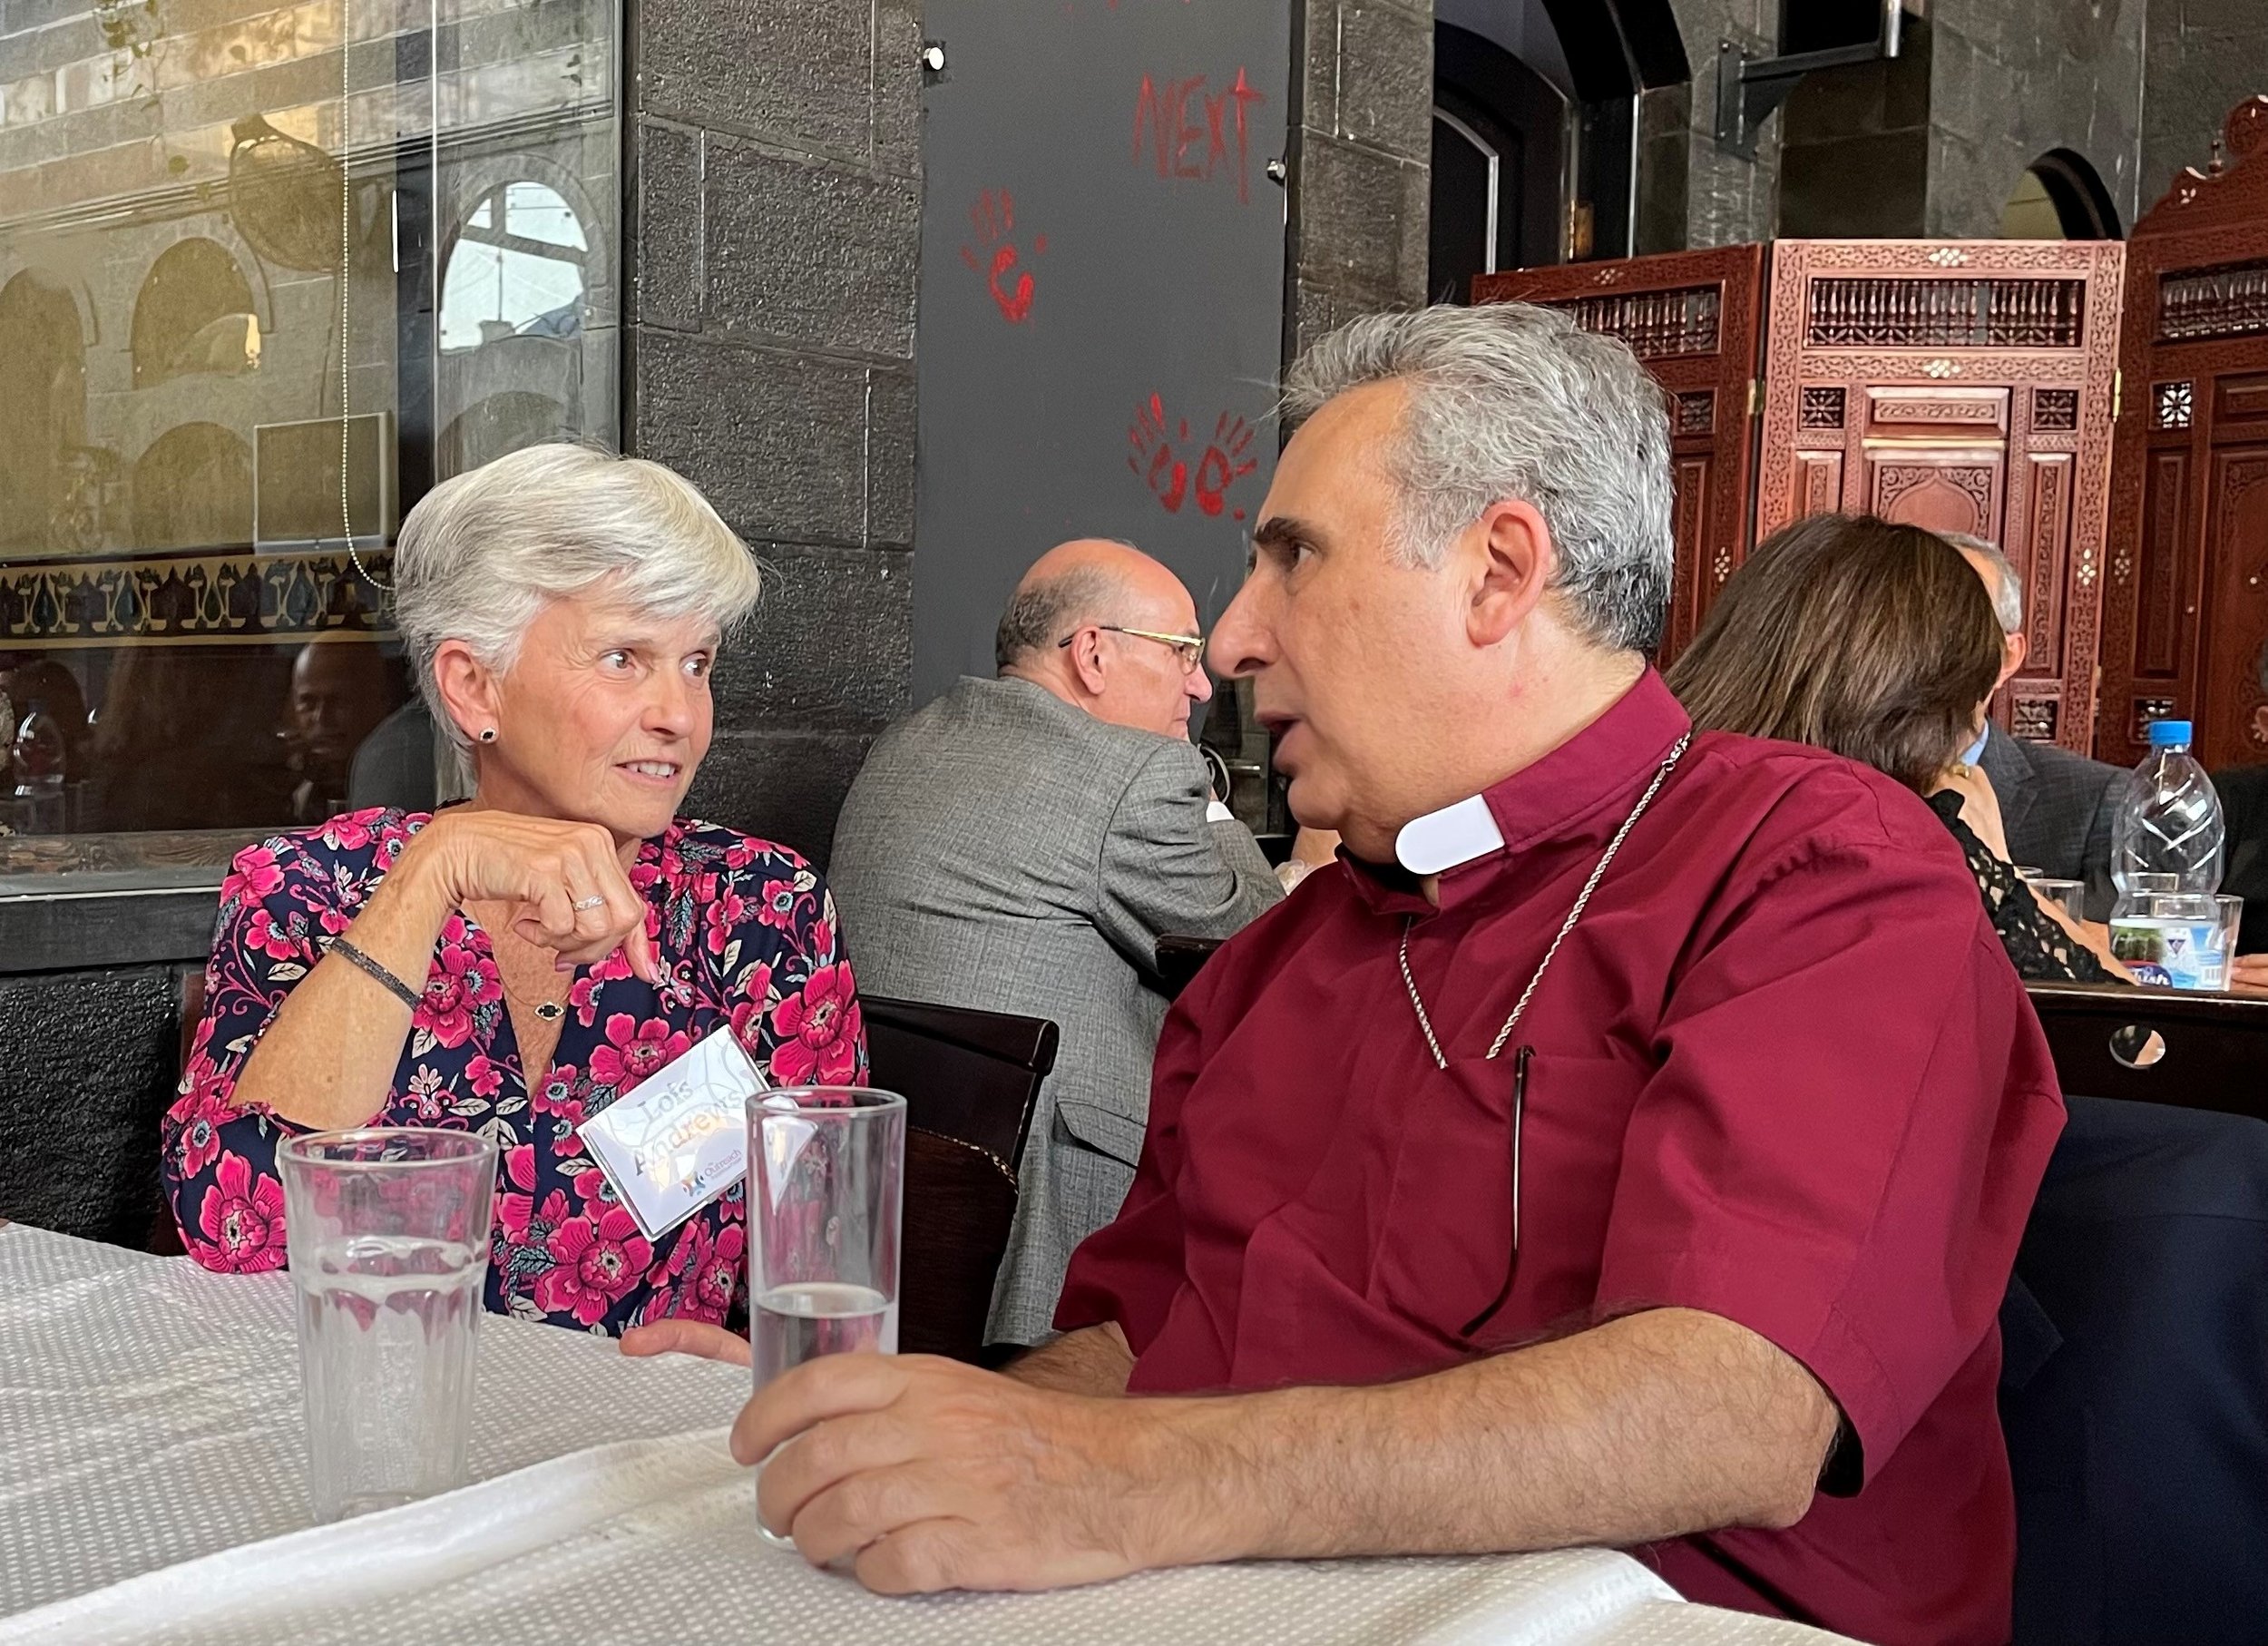  Lois deep in conversation at lunch with Rev. Joseph Kassab, the General Secretary of the National Evangelical Synod of Syria and Lebanon  